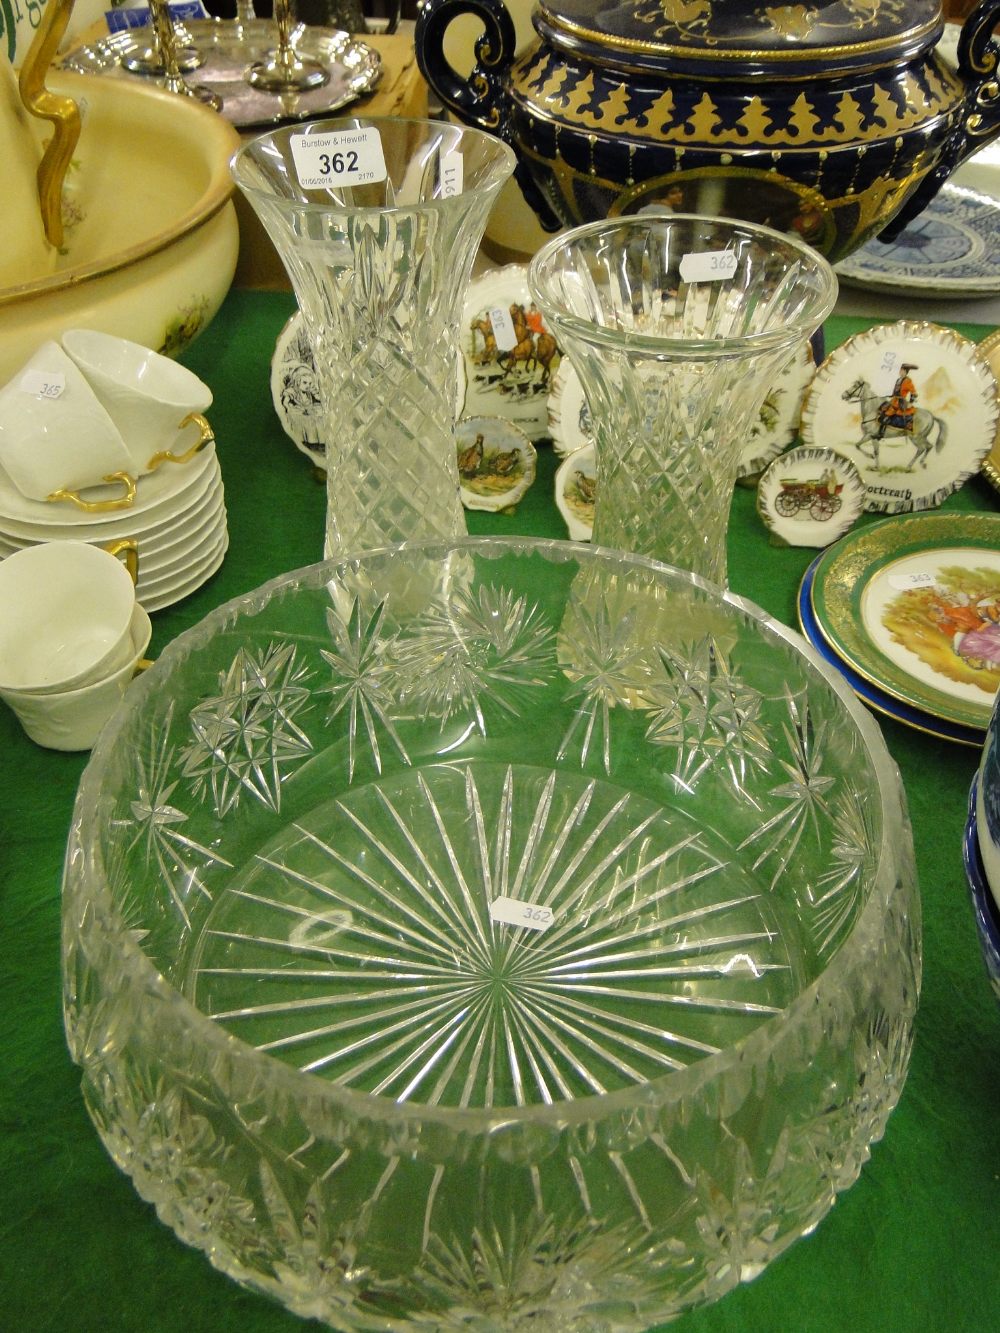 A large crystal fruit bowl and 2 cut-glass vases.